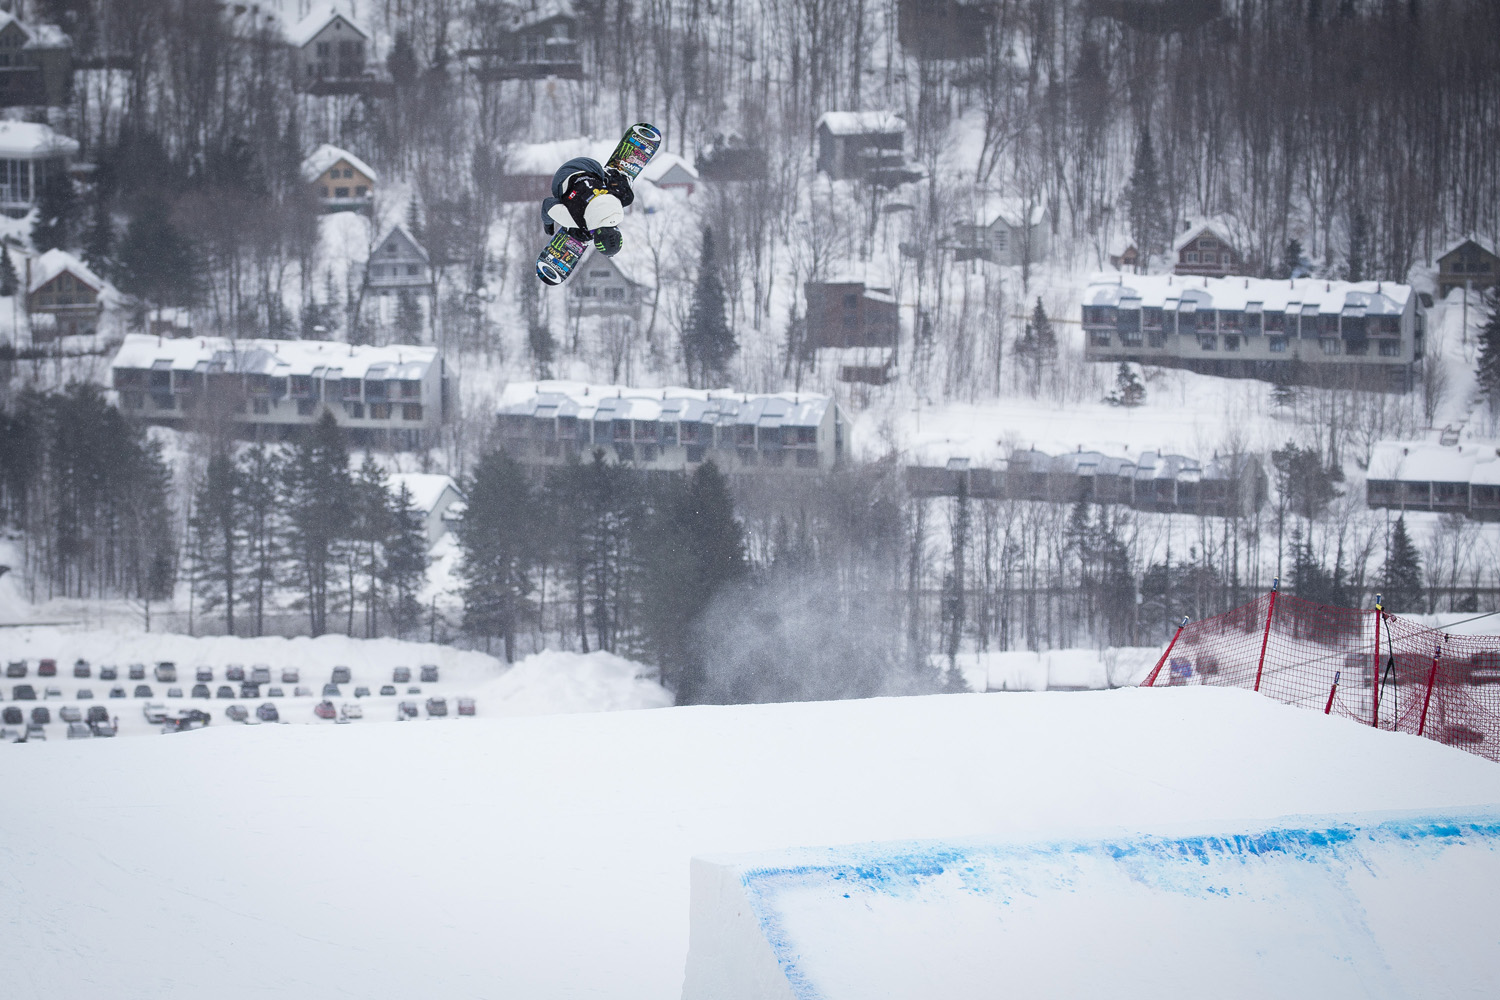 Monster Energy's Jamie Anderson Takes Second Place in Slopestyle at Jamboree in Quebec